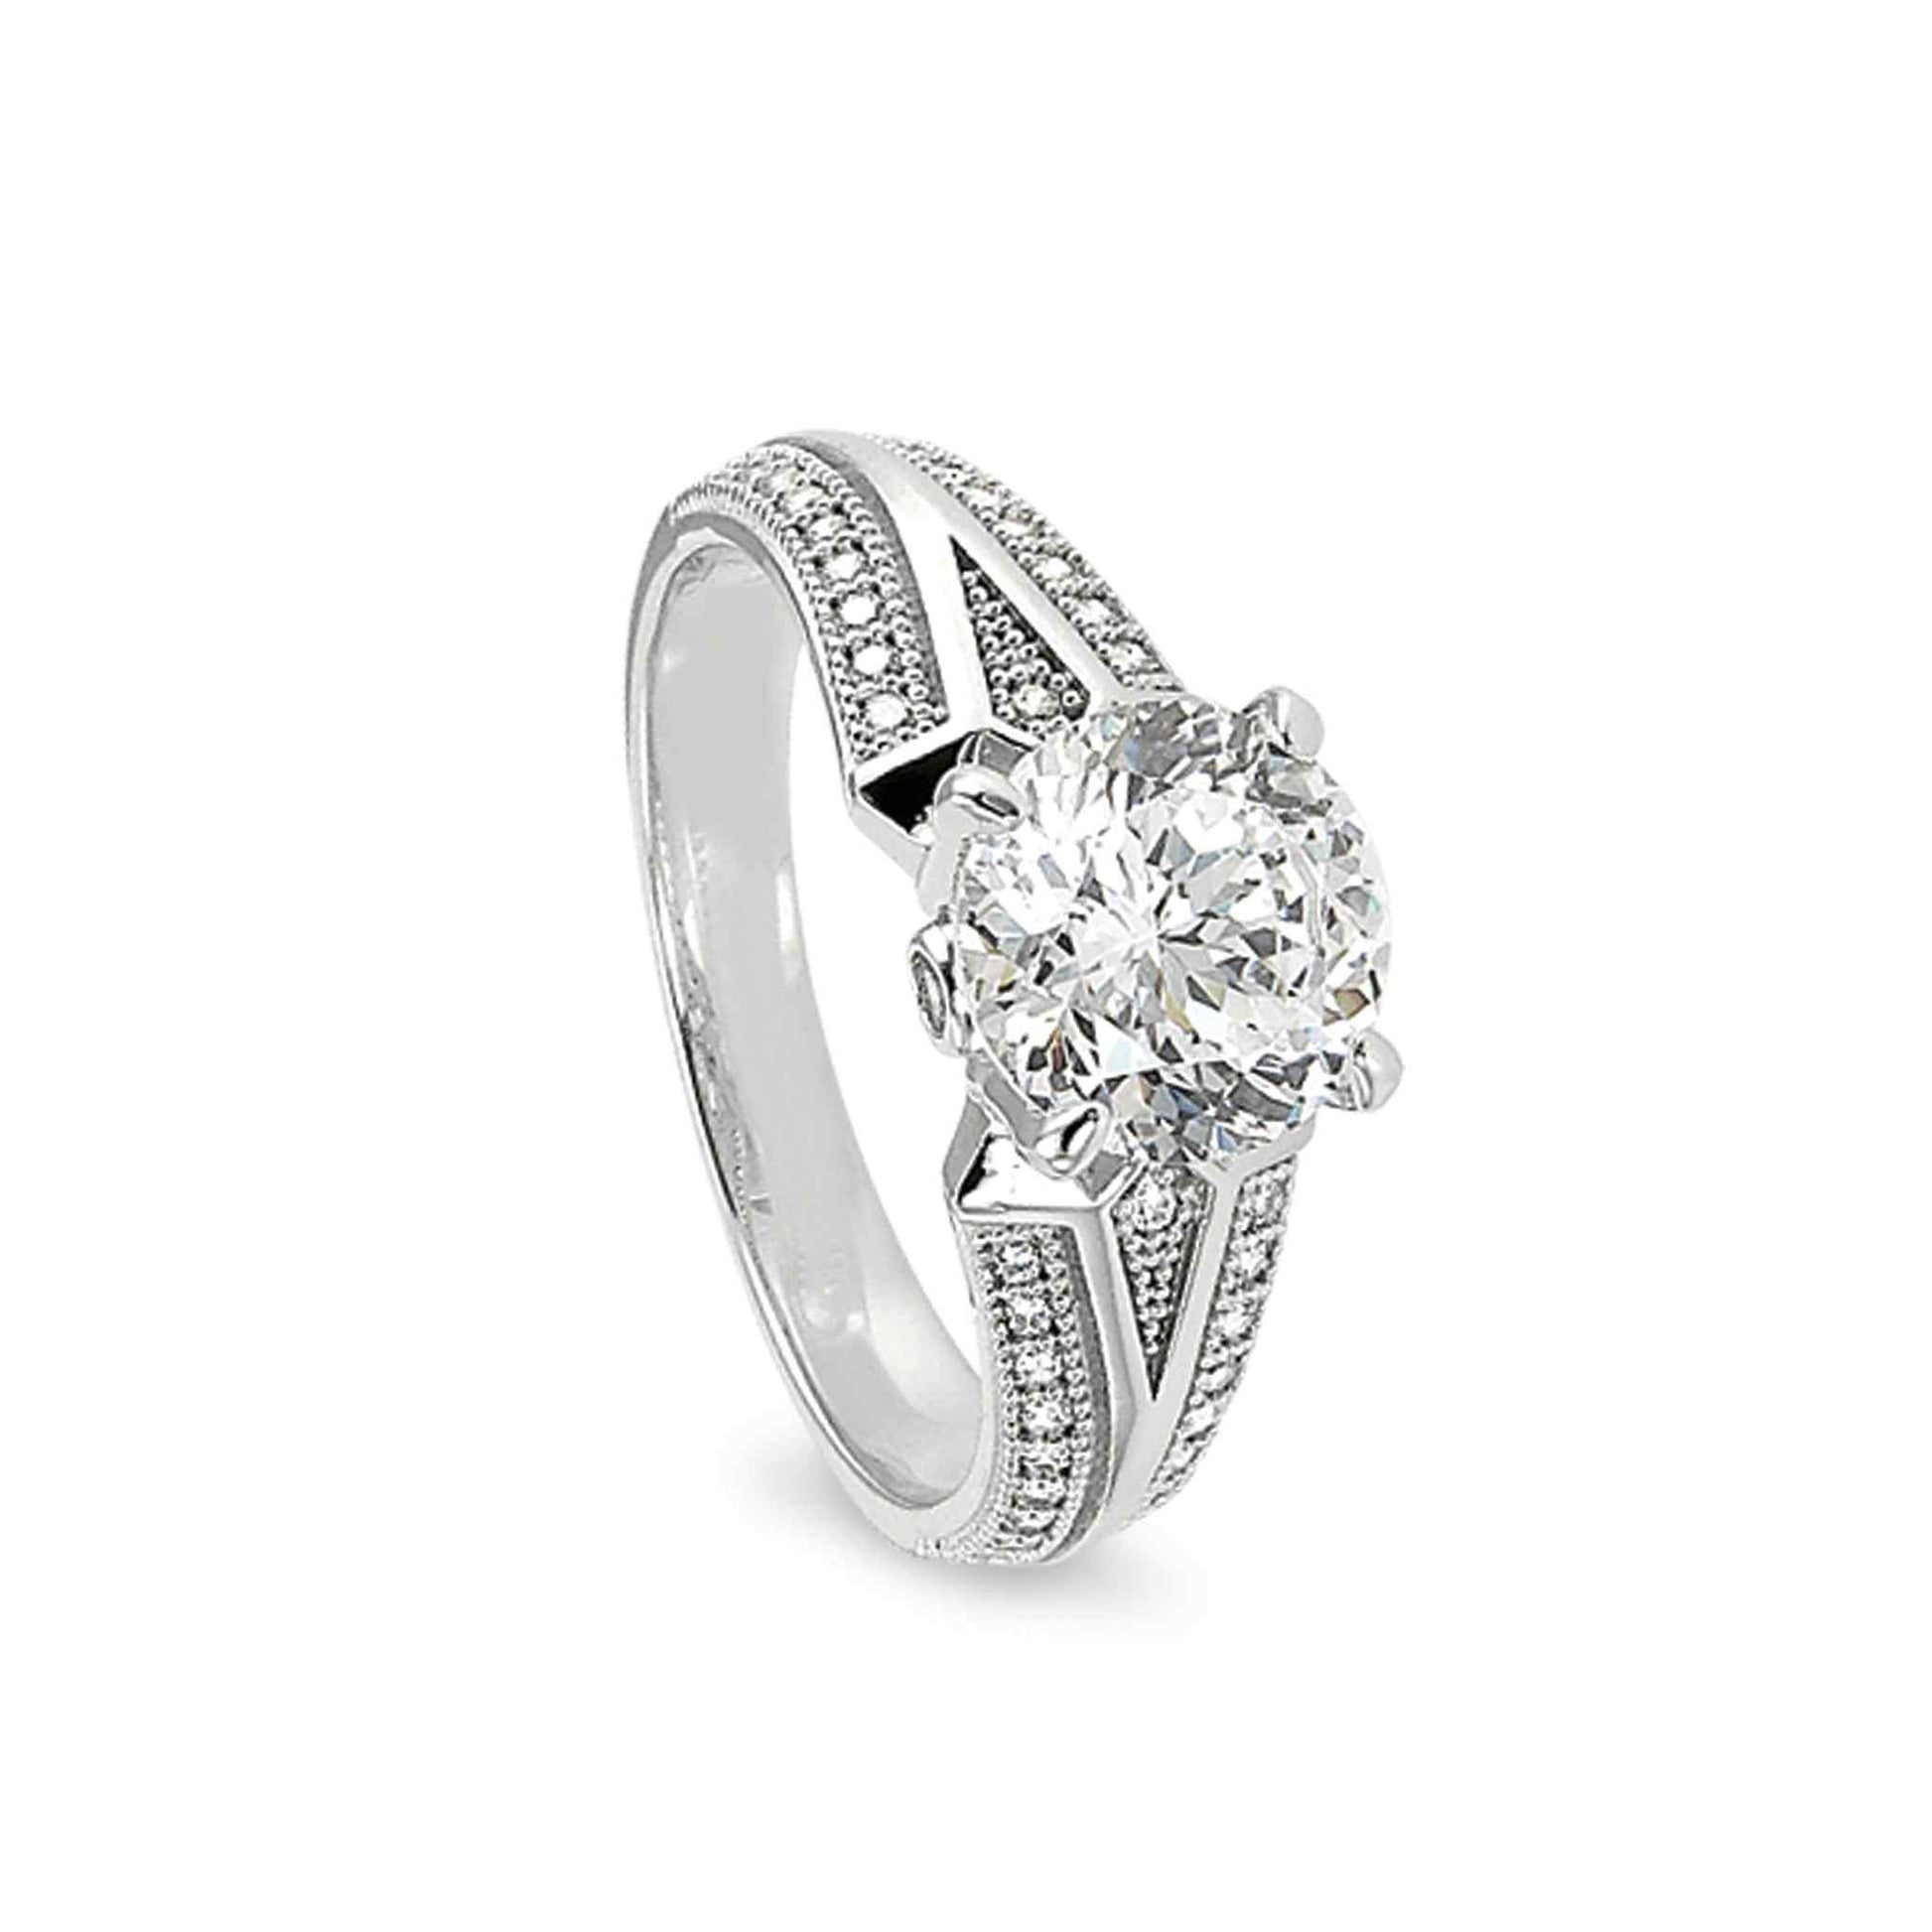 A v shaped band engagement ring with 100 facet simulated diamond displayed on a neutral white background.